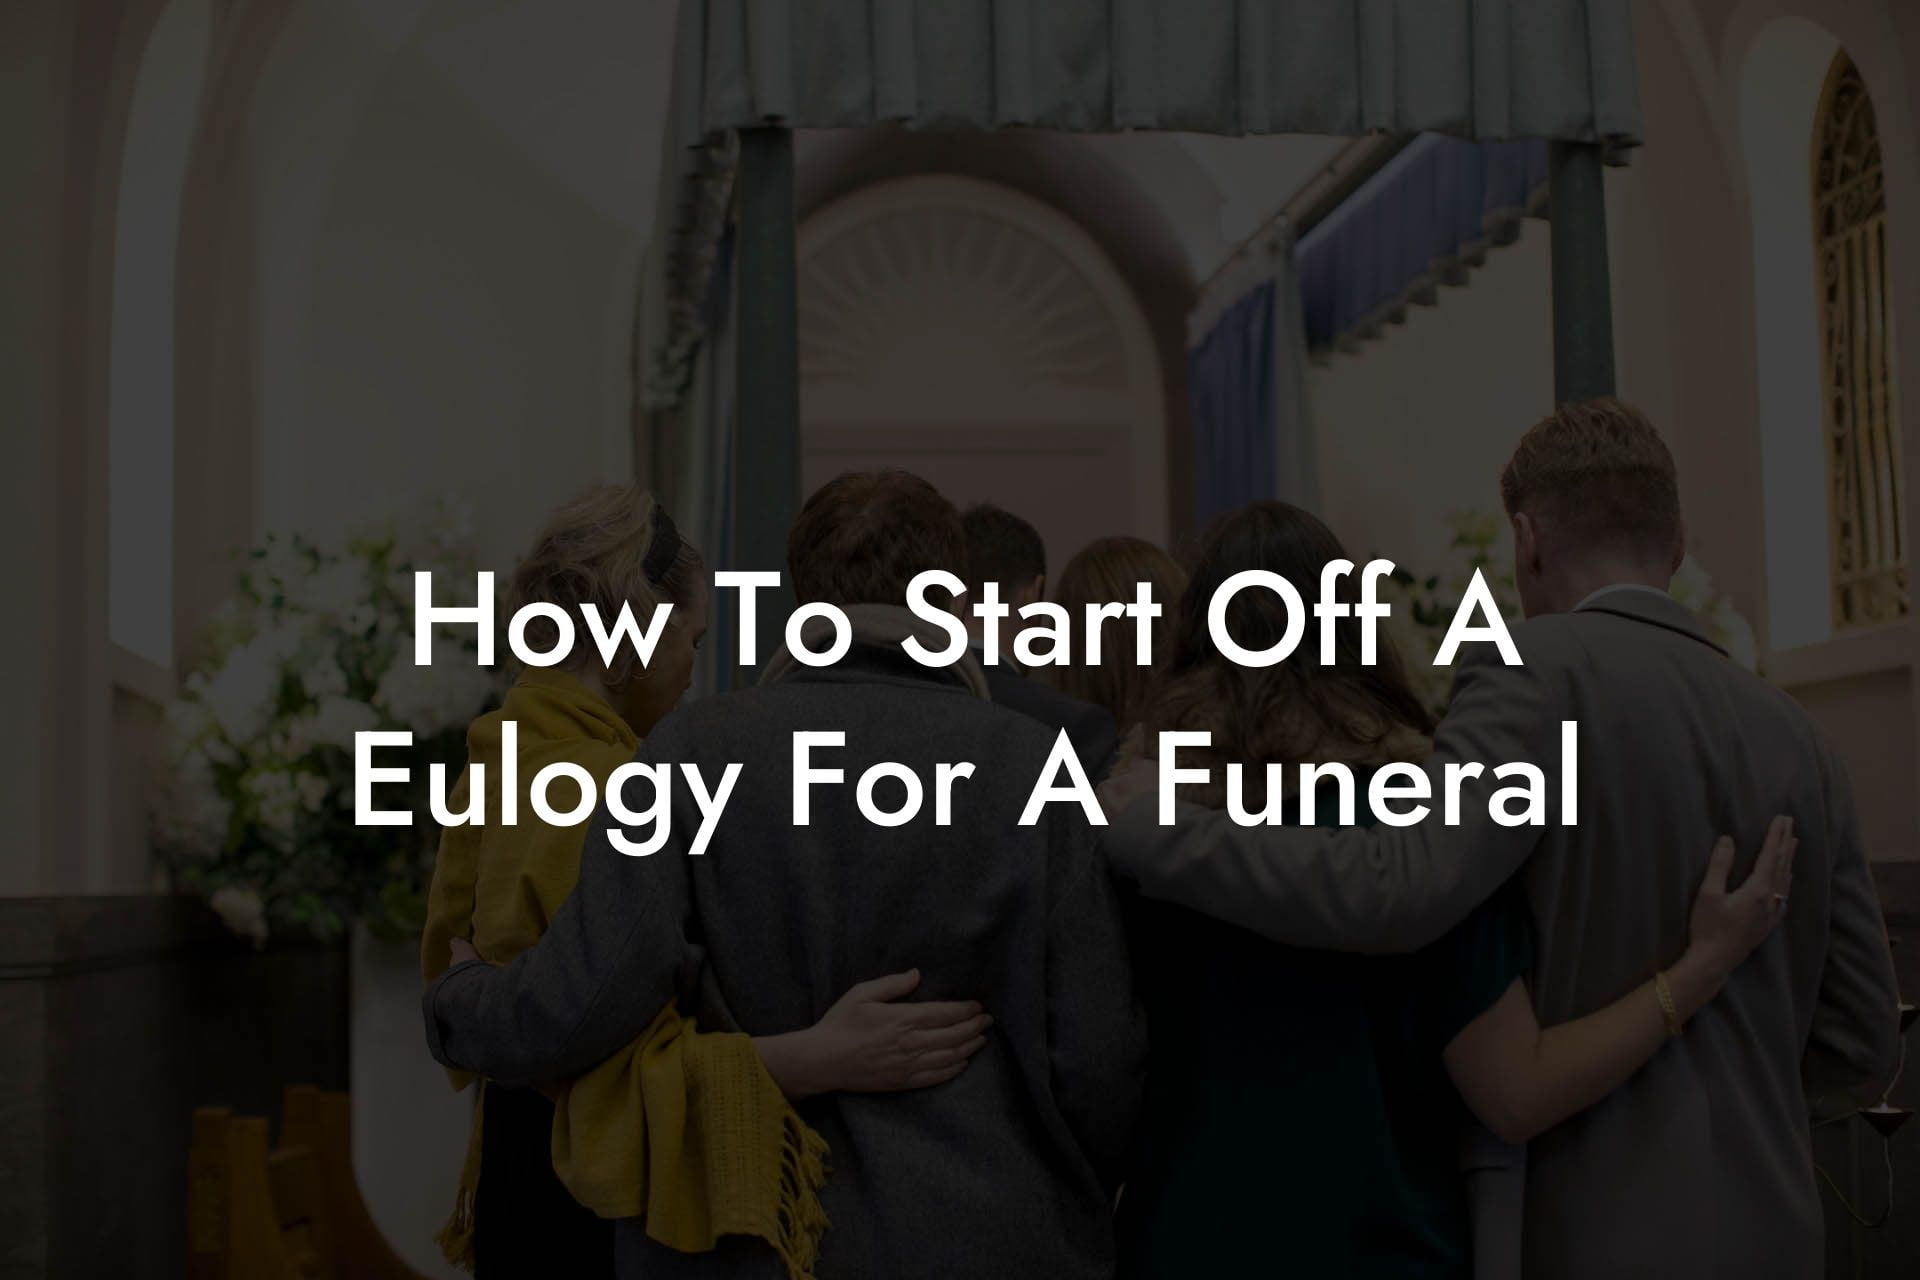 How To Start Off A Eulogy For A Funeral